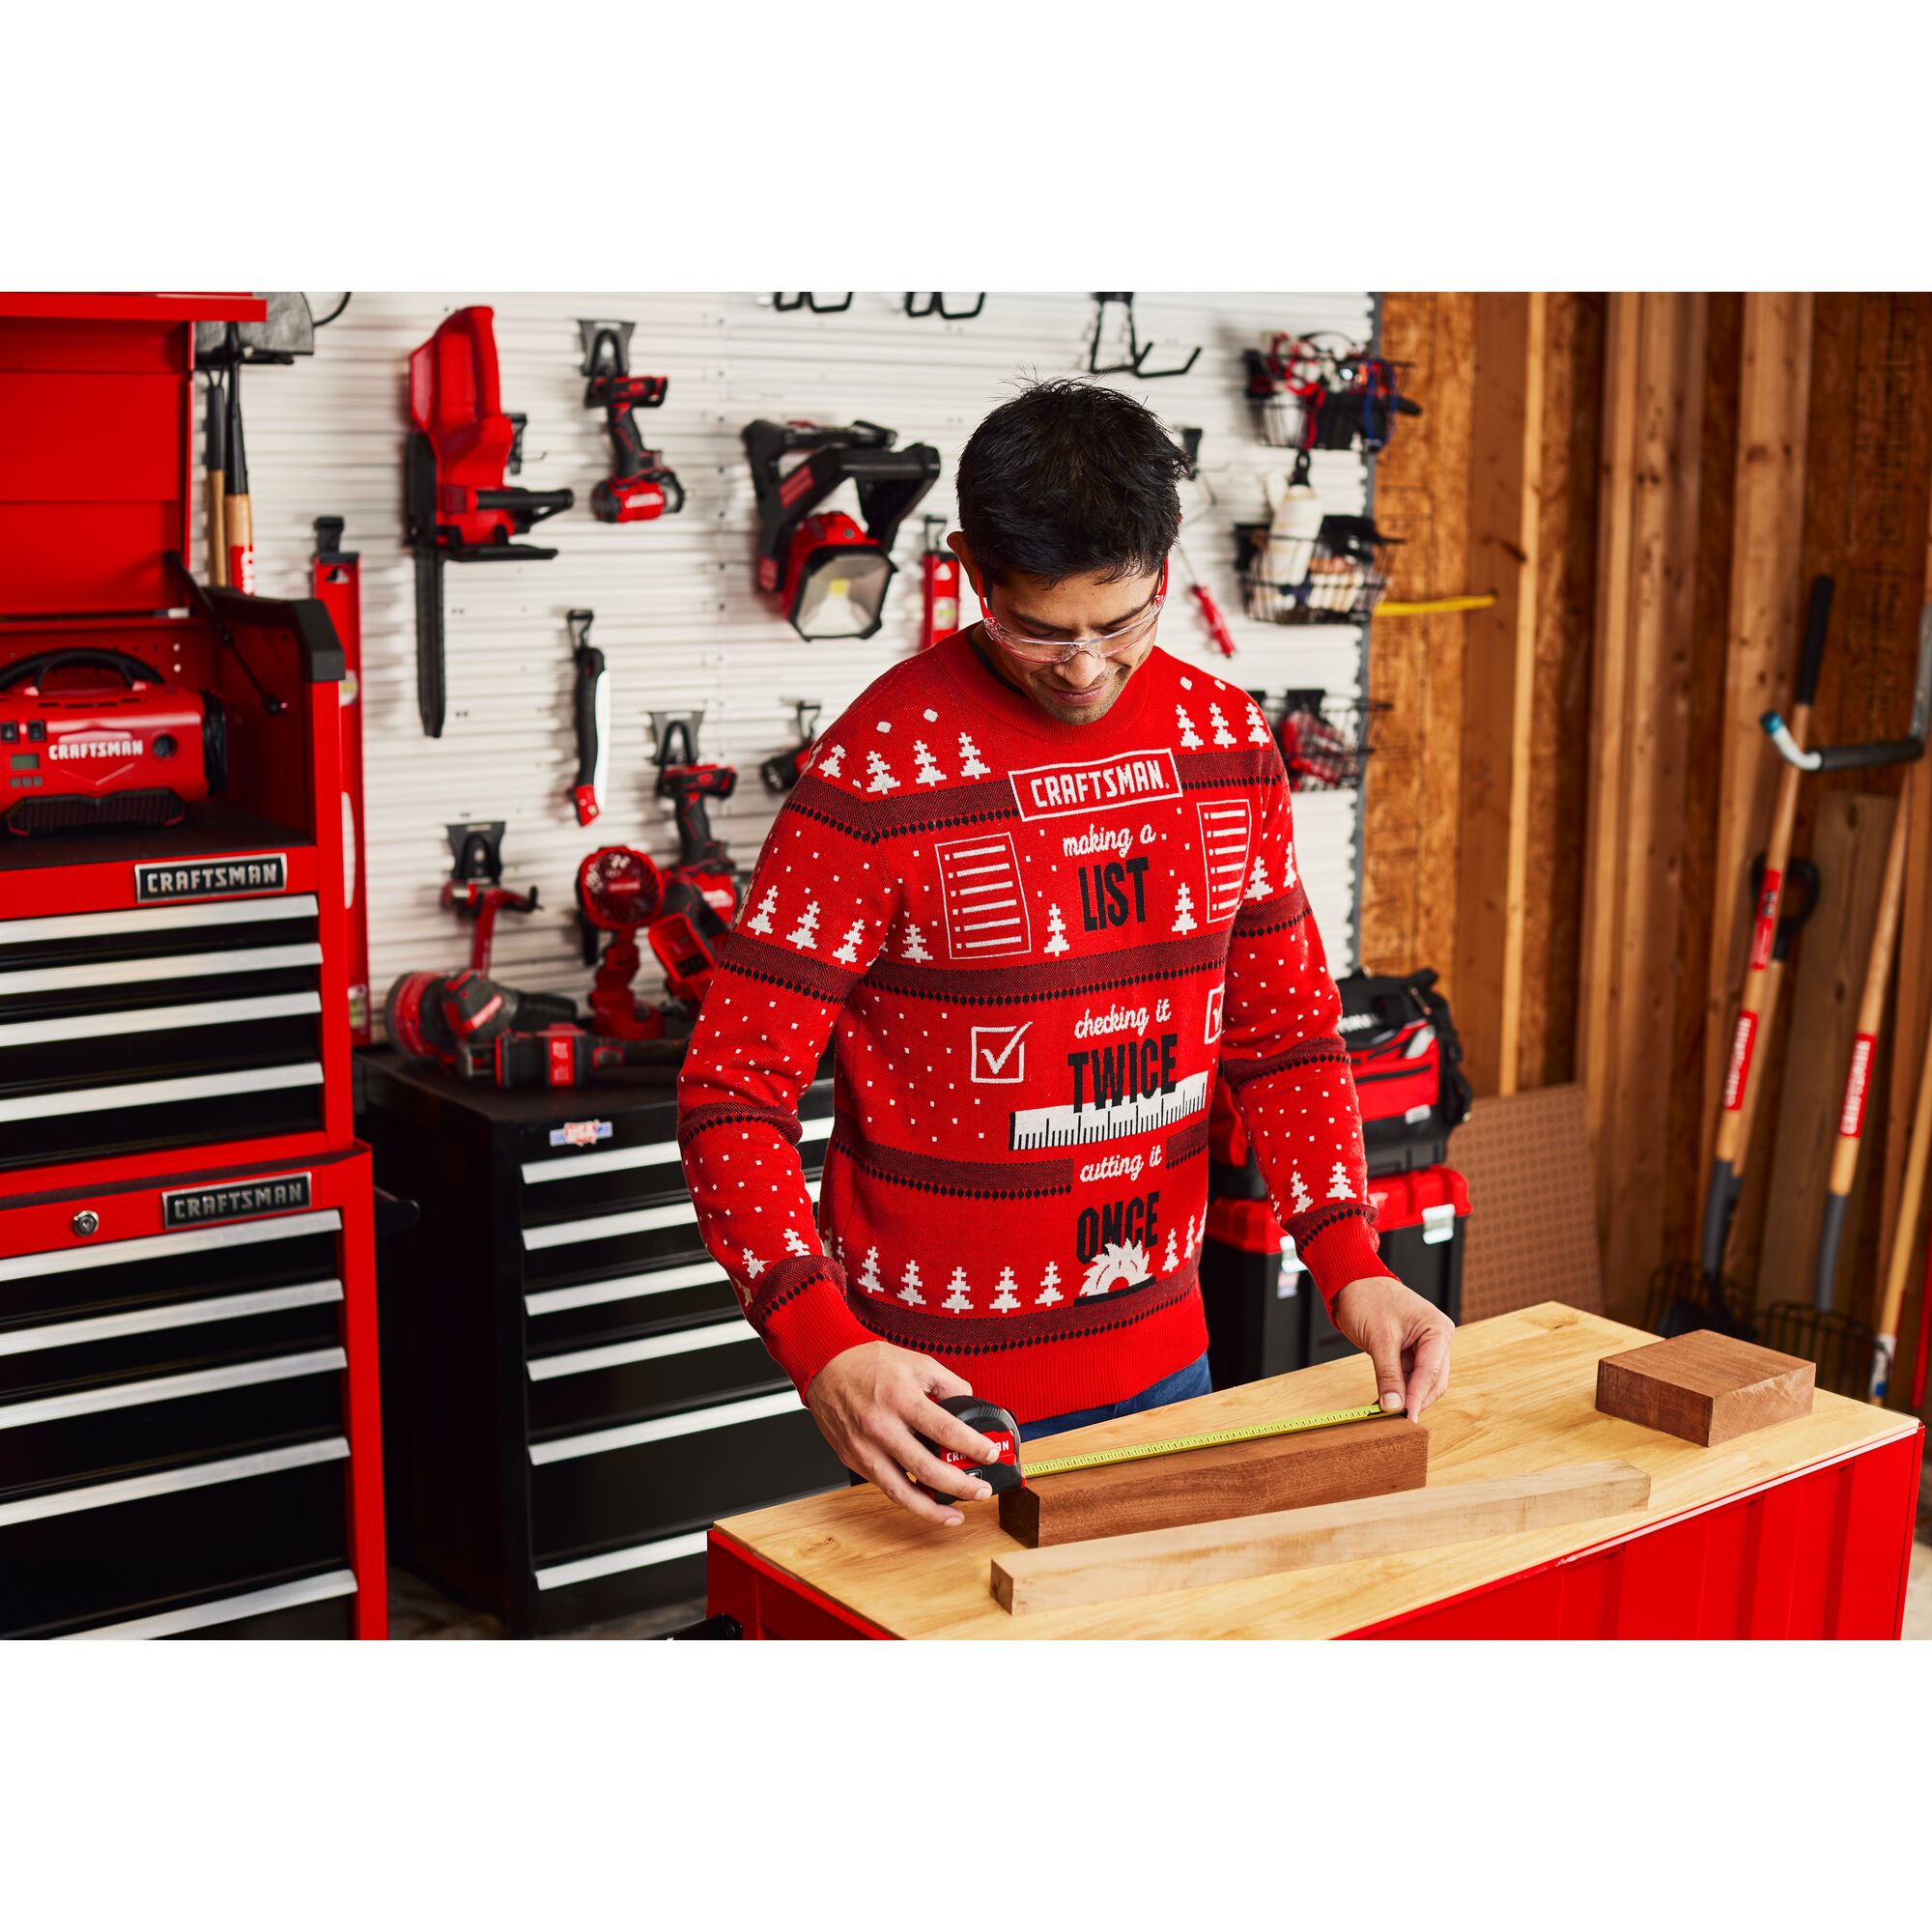 Male in CRAFTSMAN Holiday Sweater measuring wood with measuring tape